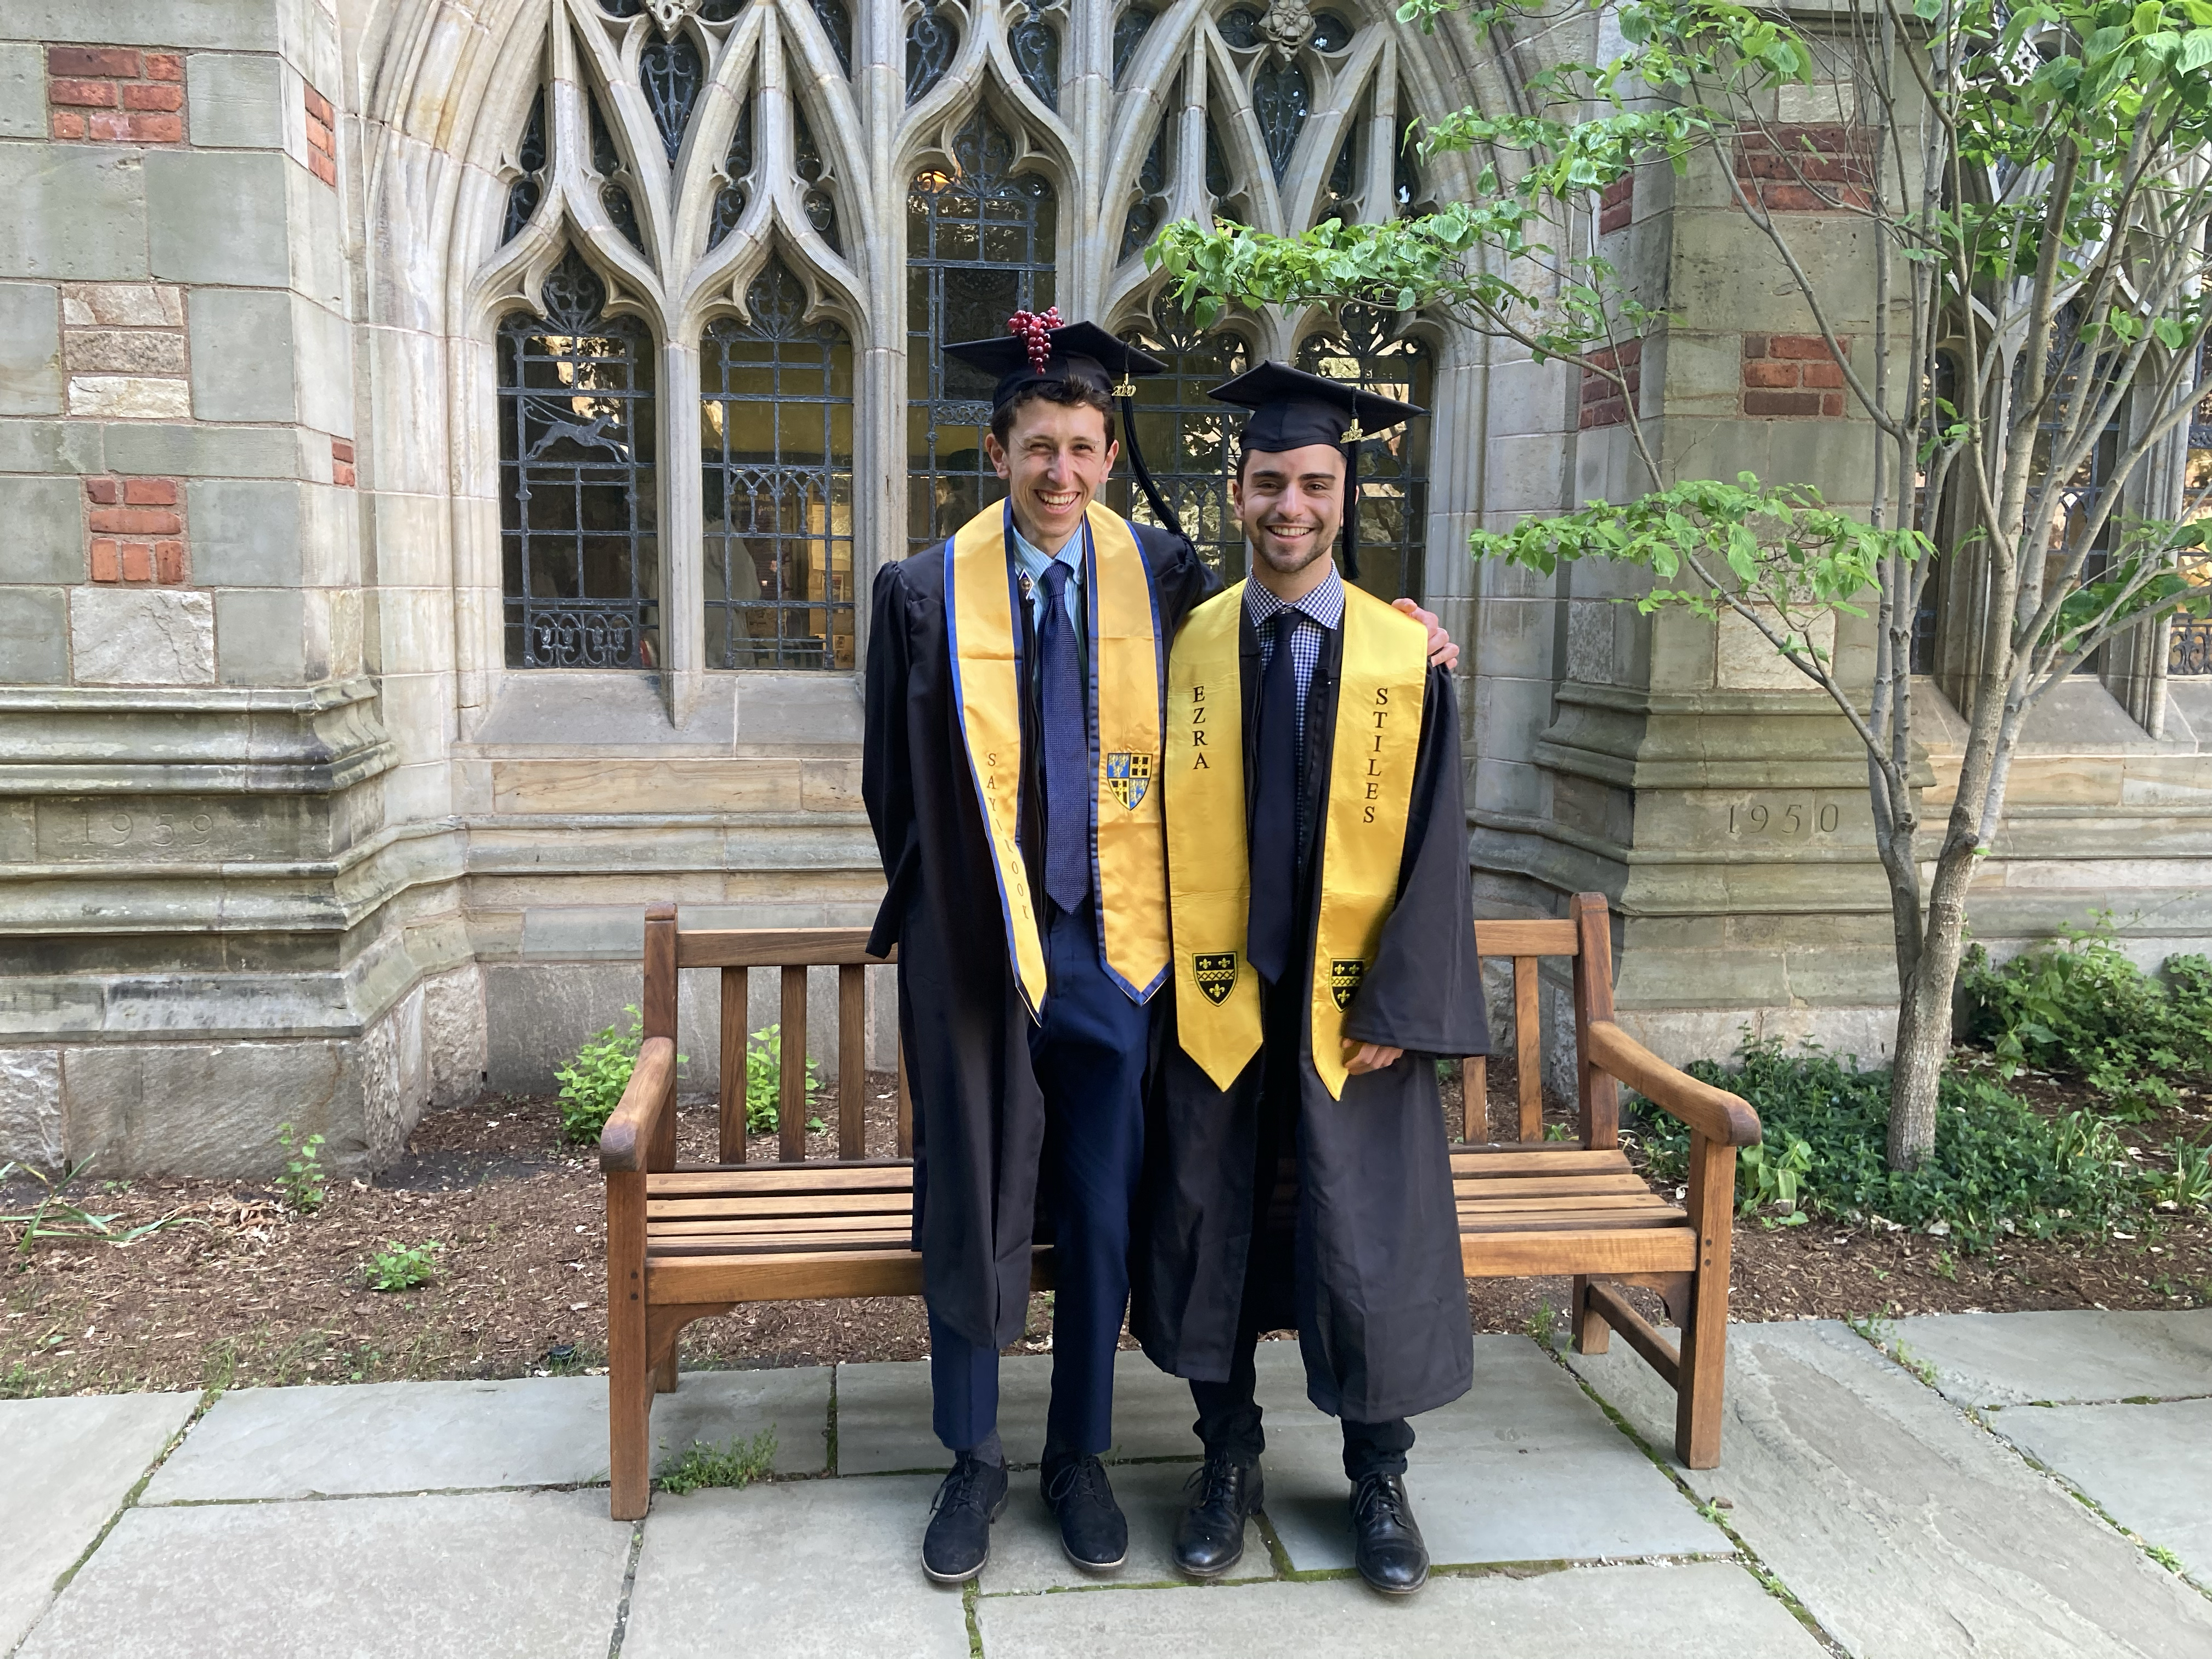 Two friends, both wearing caps and gowns and yellow stoles, pose outside in Sterling's Selin Courtyard. The student at left has grapes attached to his cap and wears the Saybrook College stole. The shorter student at right wears a gold stole for his school and reads "Ezra Stiles." Both men are wearing dark blue ties, visible beneath their partially open gowns. A wooden bench and the leaded glass windows of the Exhibition Corridor are visible behind them. There is a small tree in leaf to the right.